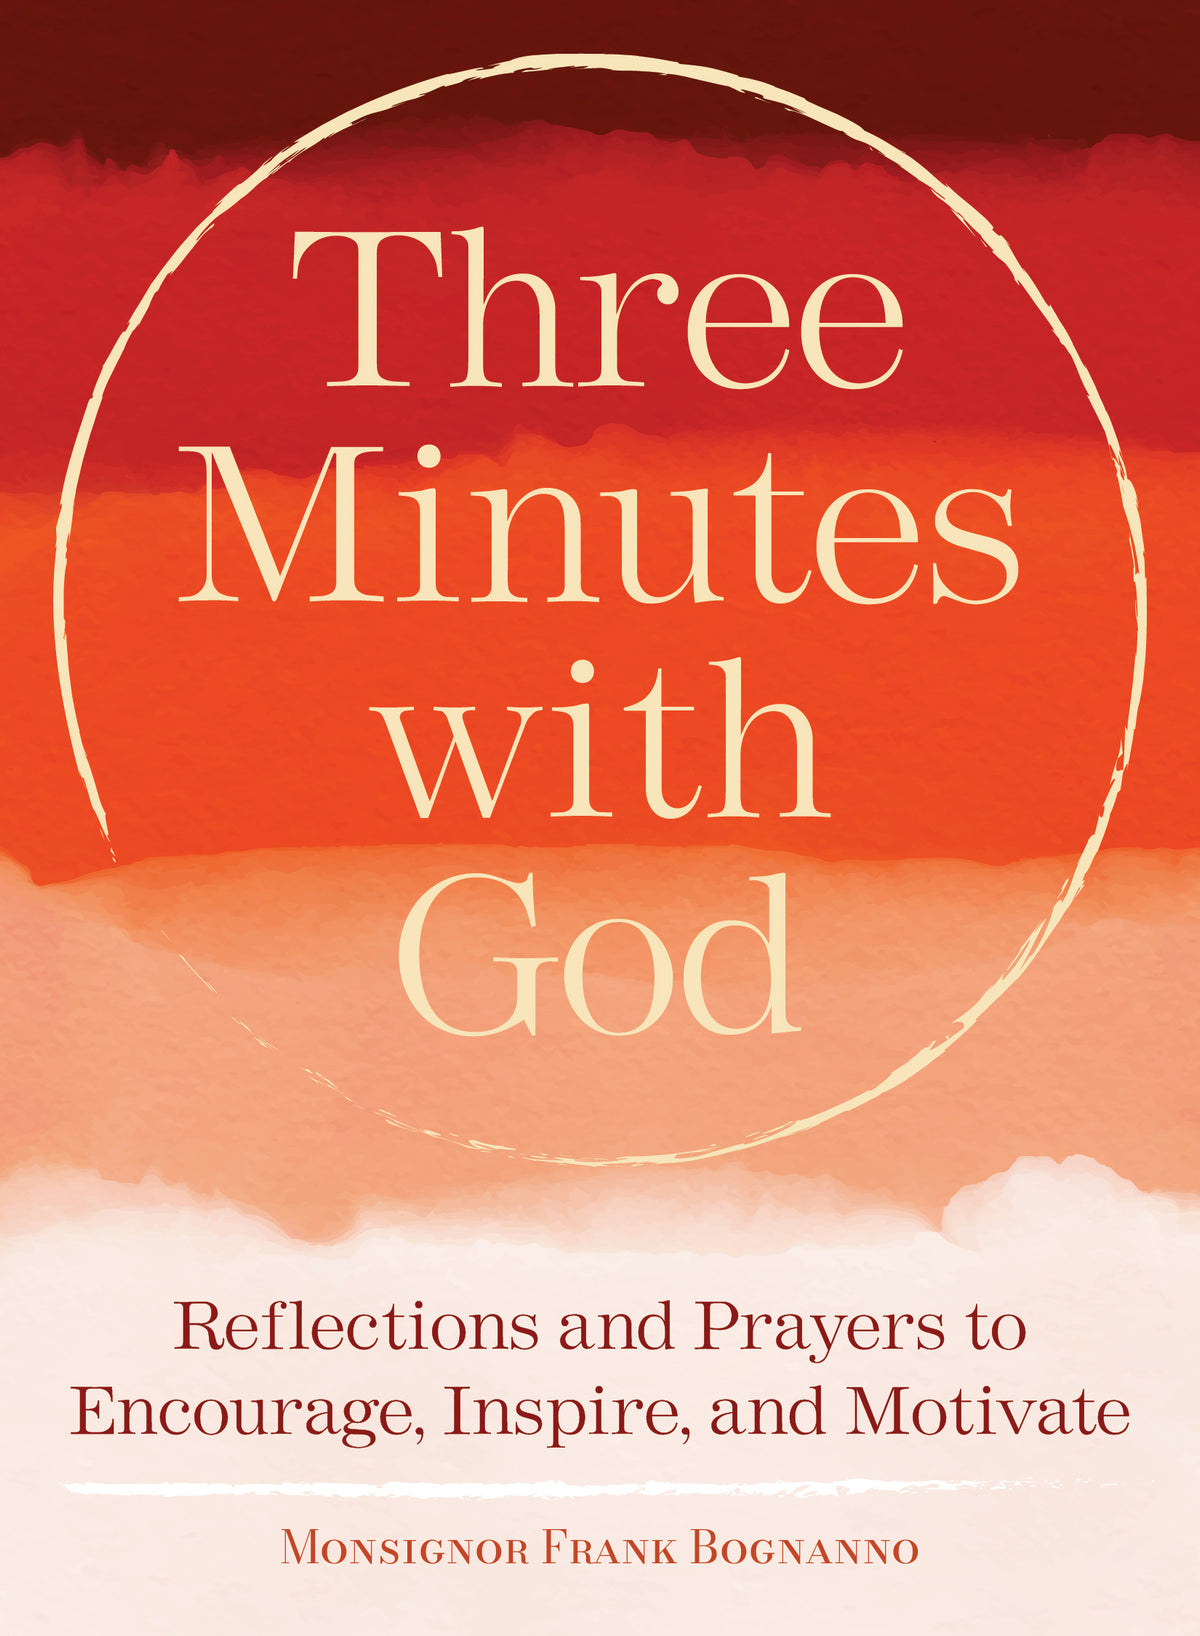 Three Minutes with God: Reflections to Inspire, Encourage, and Motivat —  Franciscan Media